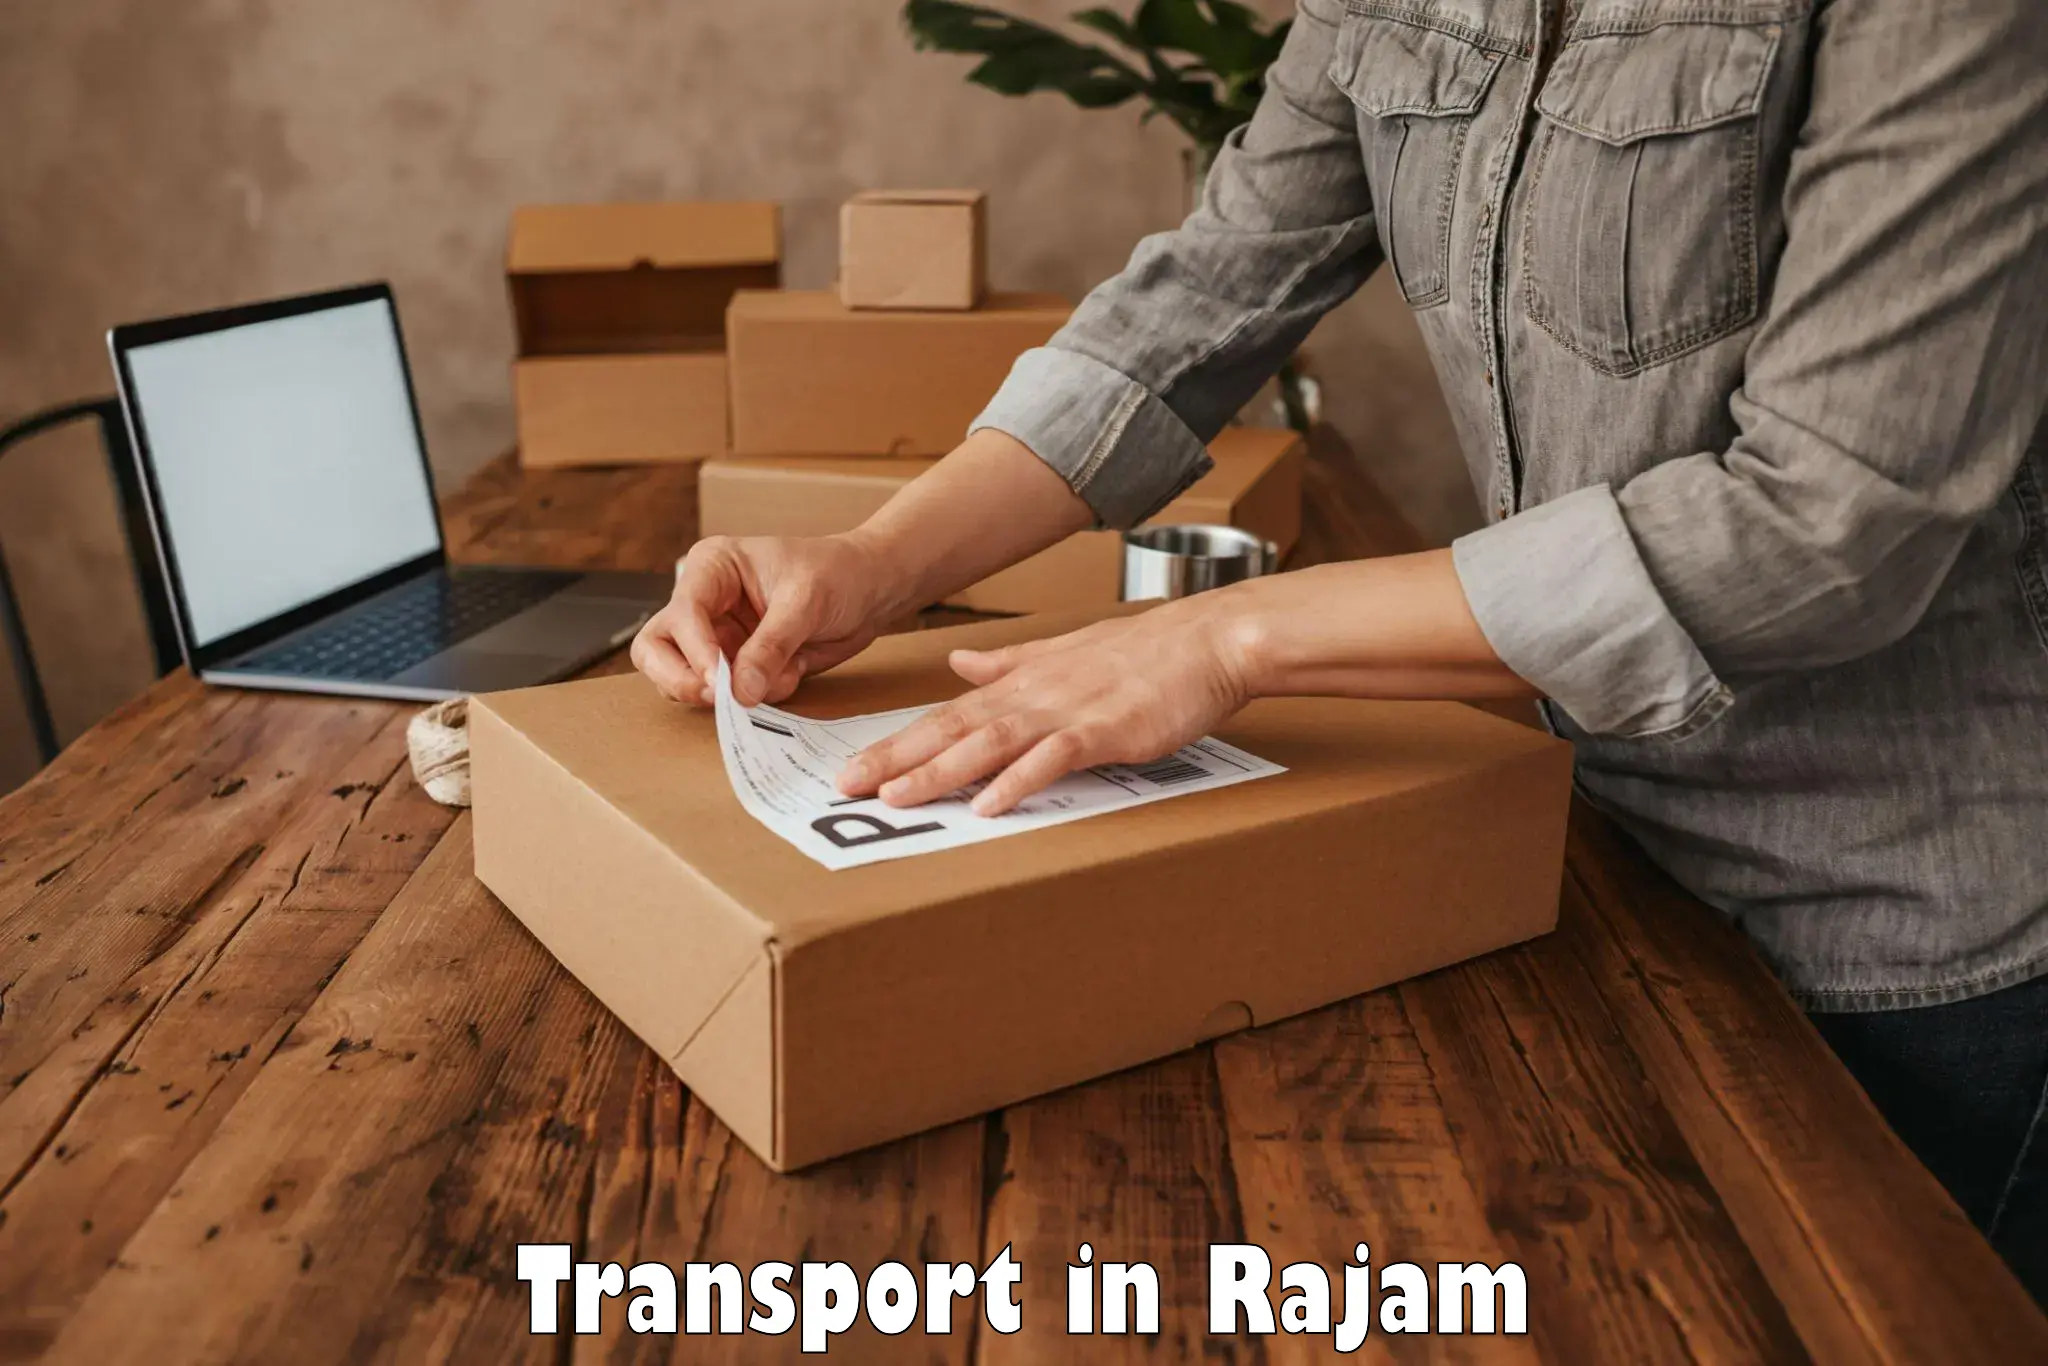 Domestic goods transportation services in Rajam